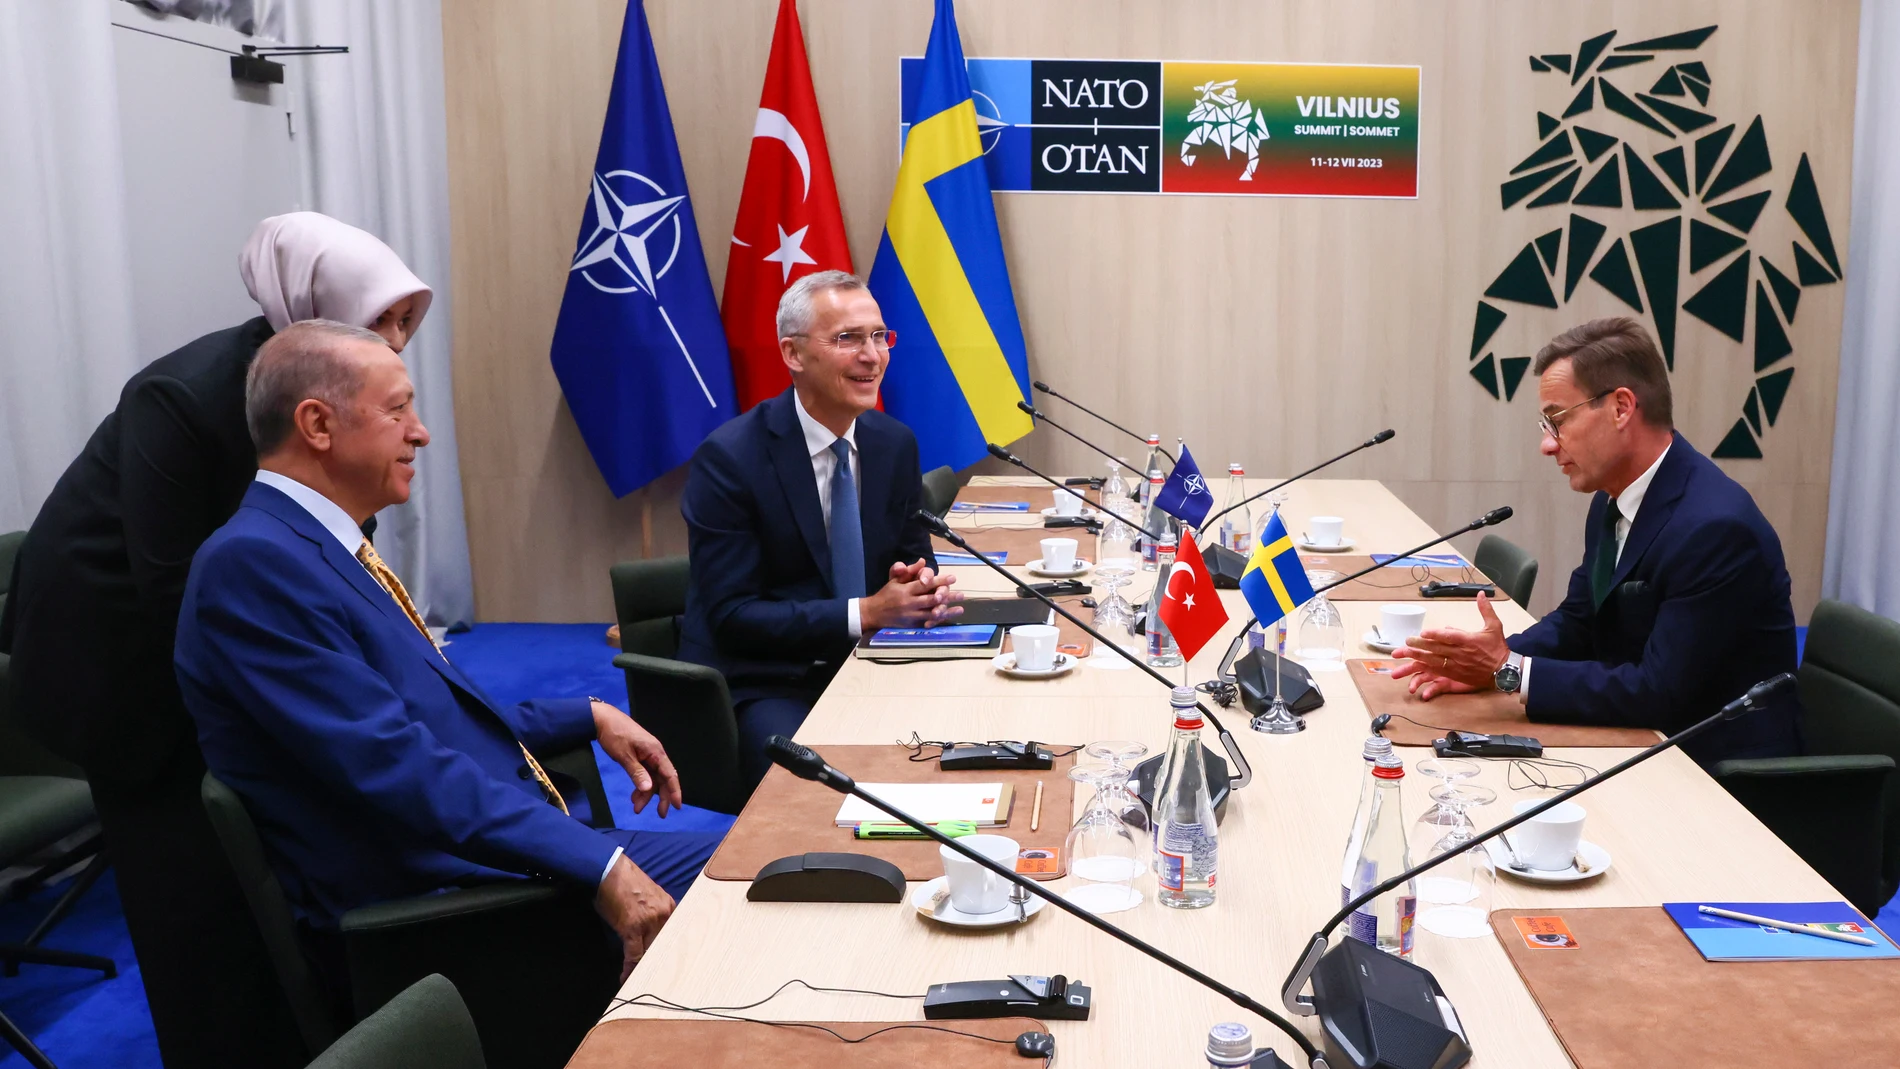 Vilnius (Lithuania), 10/07/2023.- NATO Secretary-General Jens Stoltenberg (C), Turkish President Tayyip Erdogan (L) and Swedish Prime Minister Ulf Kristersson (R) attend a meeting, on the eve of a NATO summit, in Vilnius, Lithuania, 10 July 2023. The NATO Summit will take place in Vilnius on 11 and 12 July 2023 with the alliance's leaders expected to adopt new defense plans. (Lituania, Suecia, Turquía) EFE/EPA/YVES HERMAN / POOL